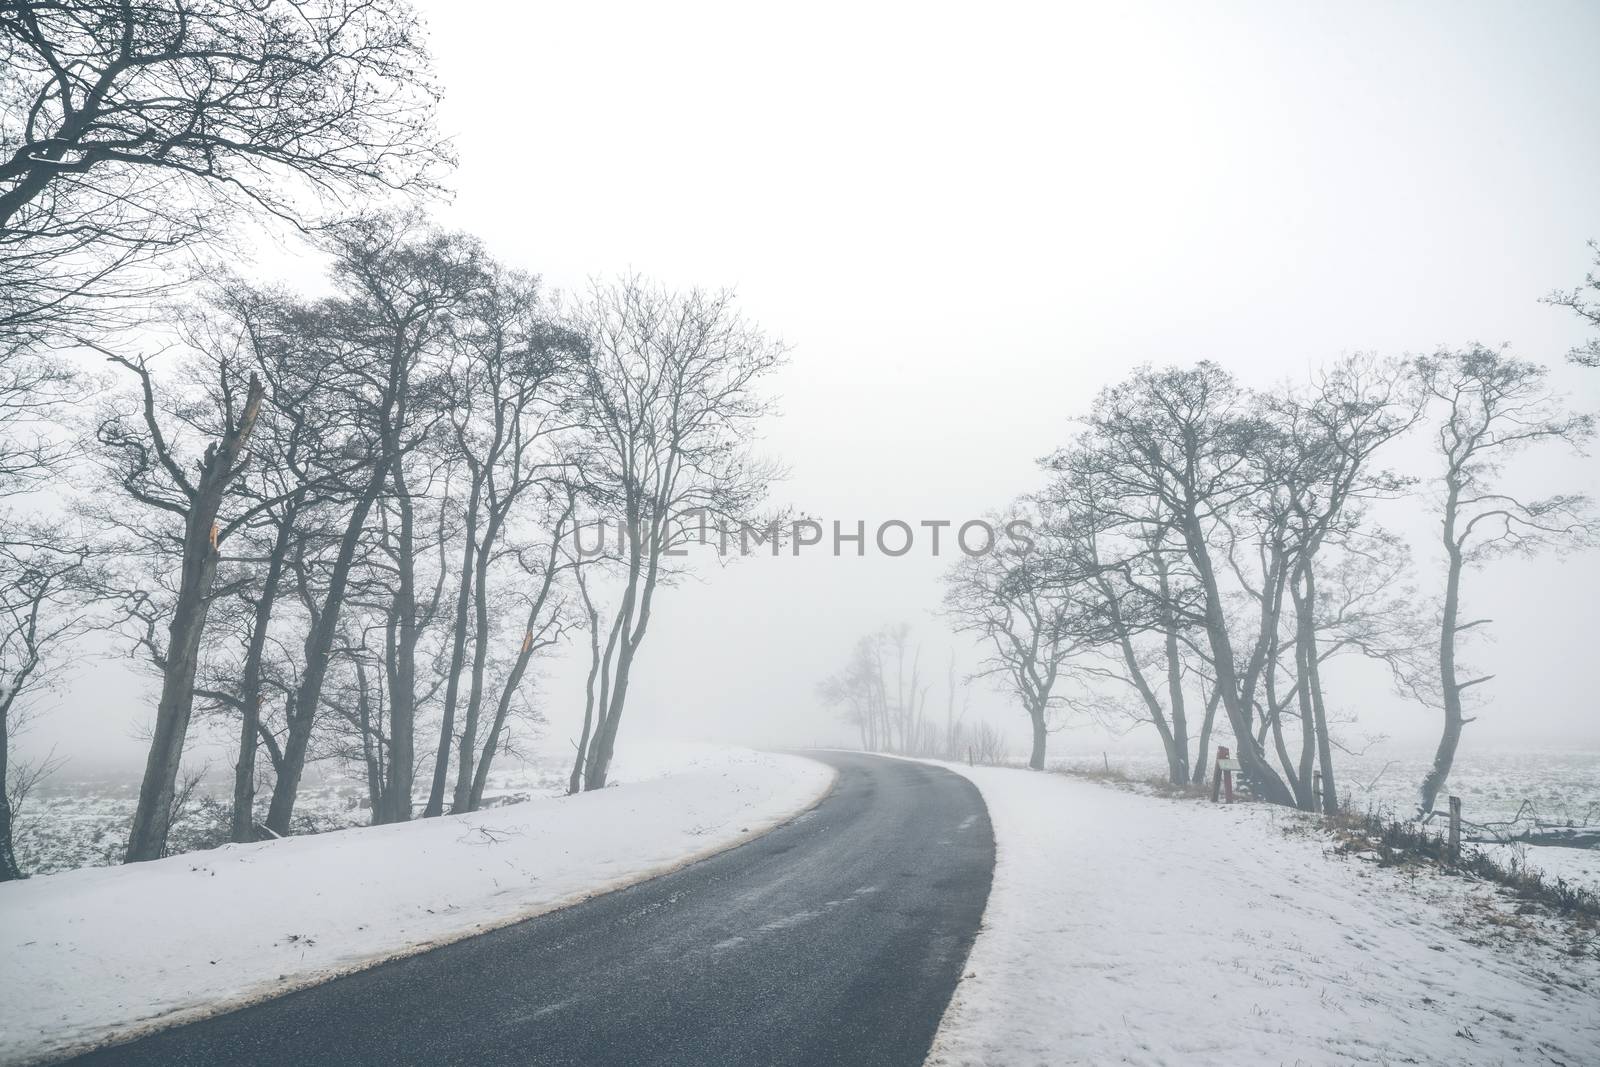 Highway curvy road in a misty winter scenery with snow on the roadside